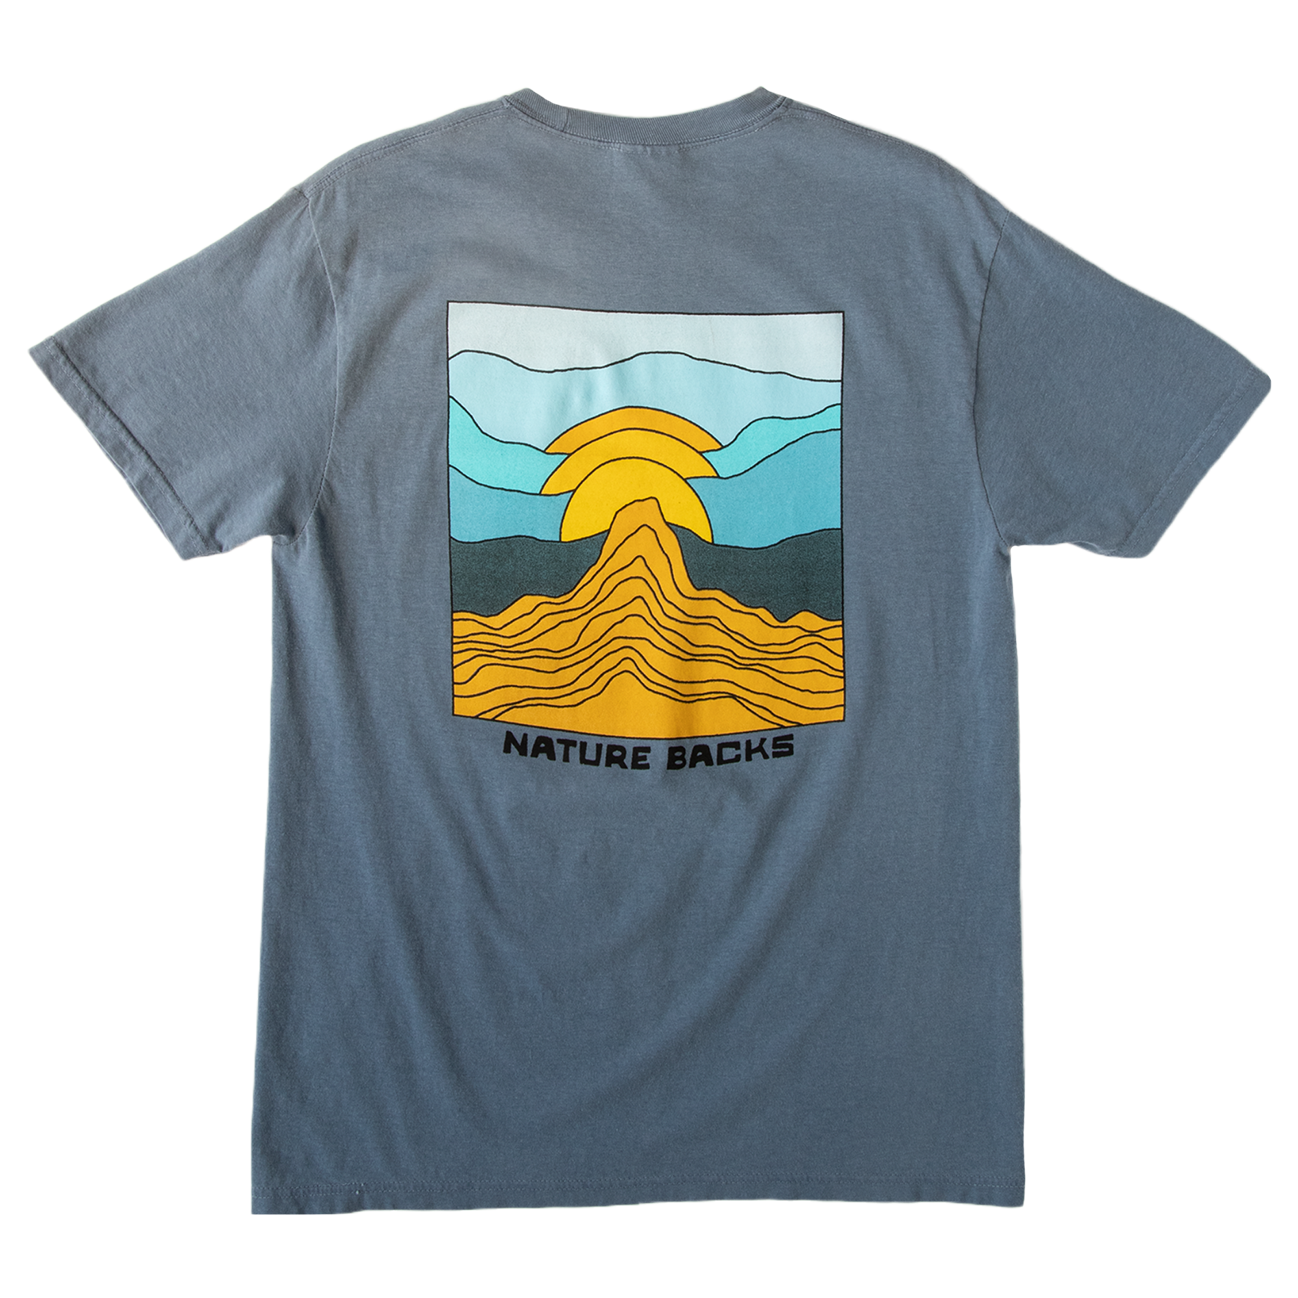 Nature Backs Limited Edition Short Sleeve 100% Organic Cotton T-Shirt | Limited Gradient Fog Short Sleeve made with Eco-Friendly Fibers Sustainably made in the USA 